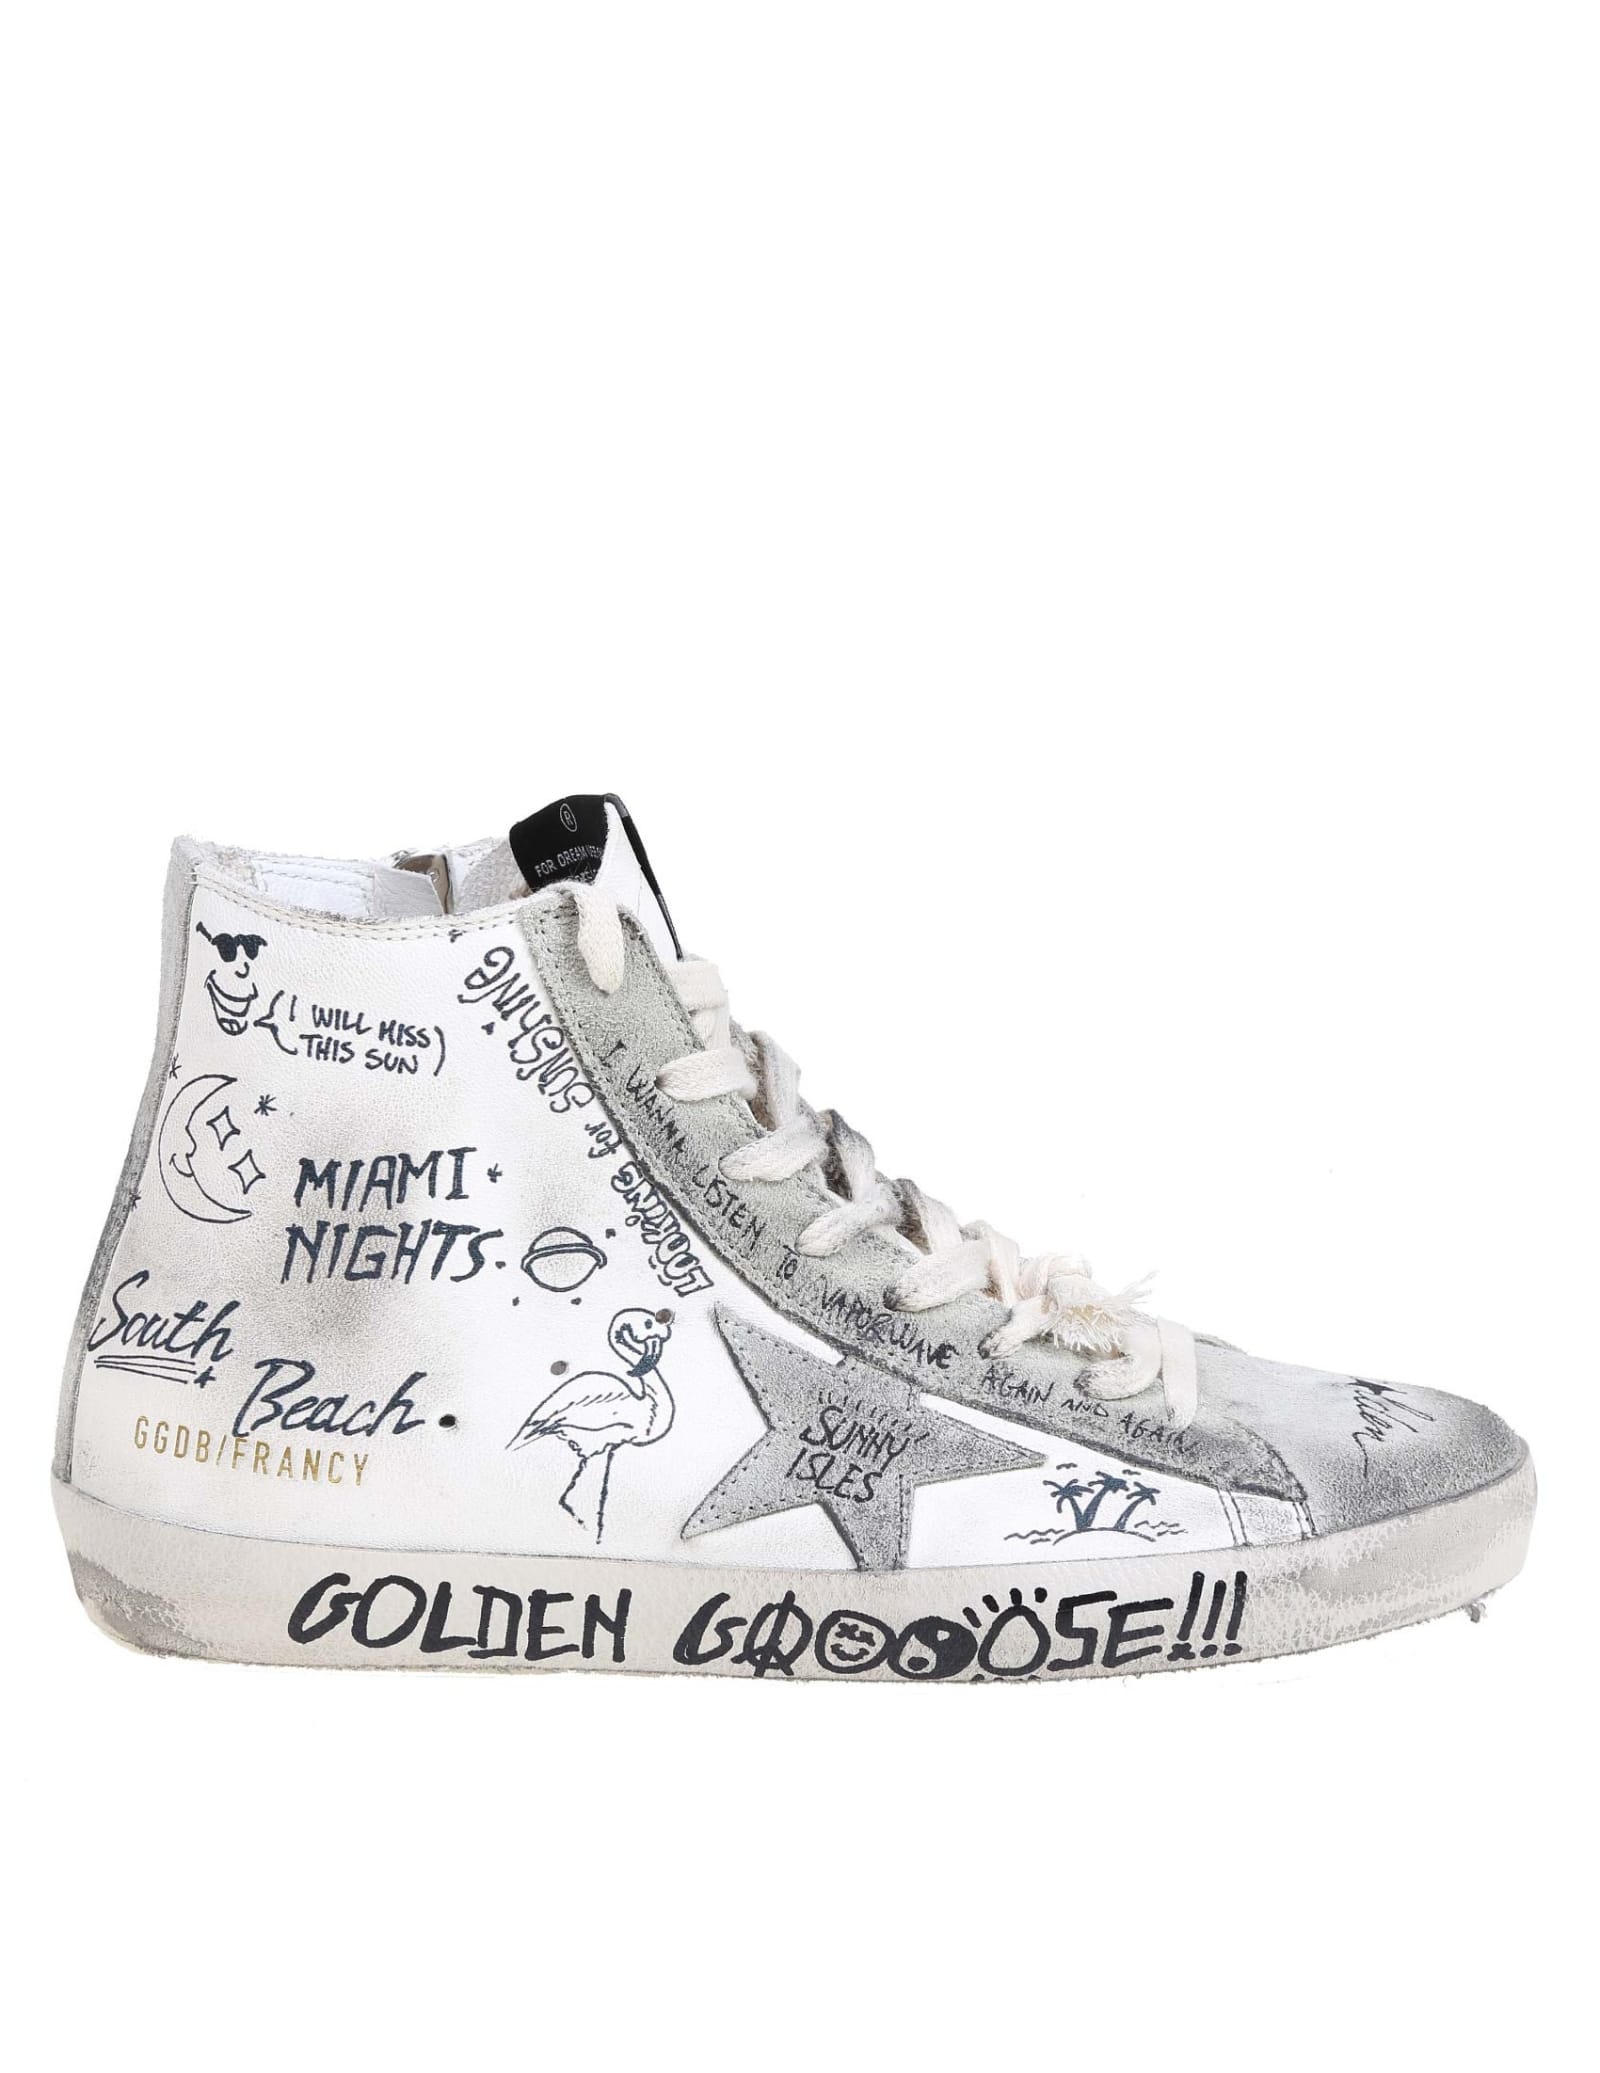 Golden Goose Francy Sneakers In Suede With Graffiti Print